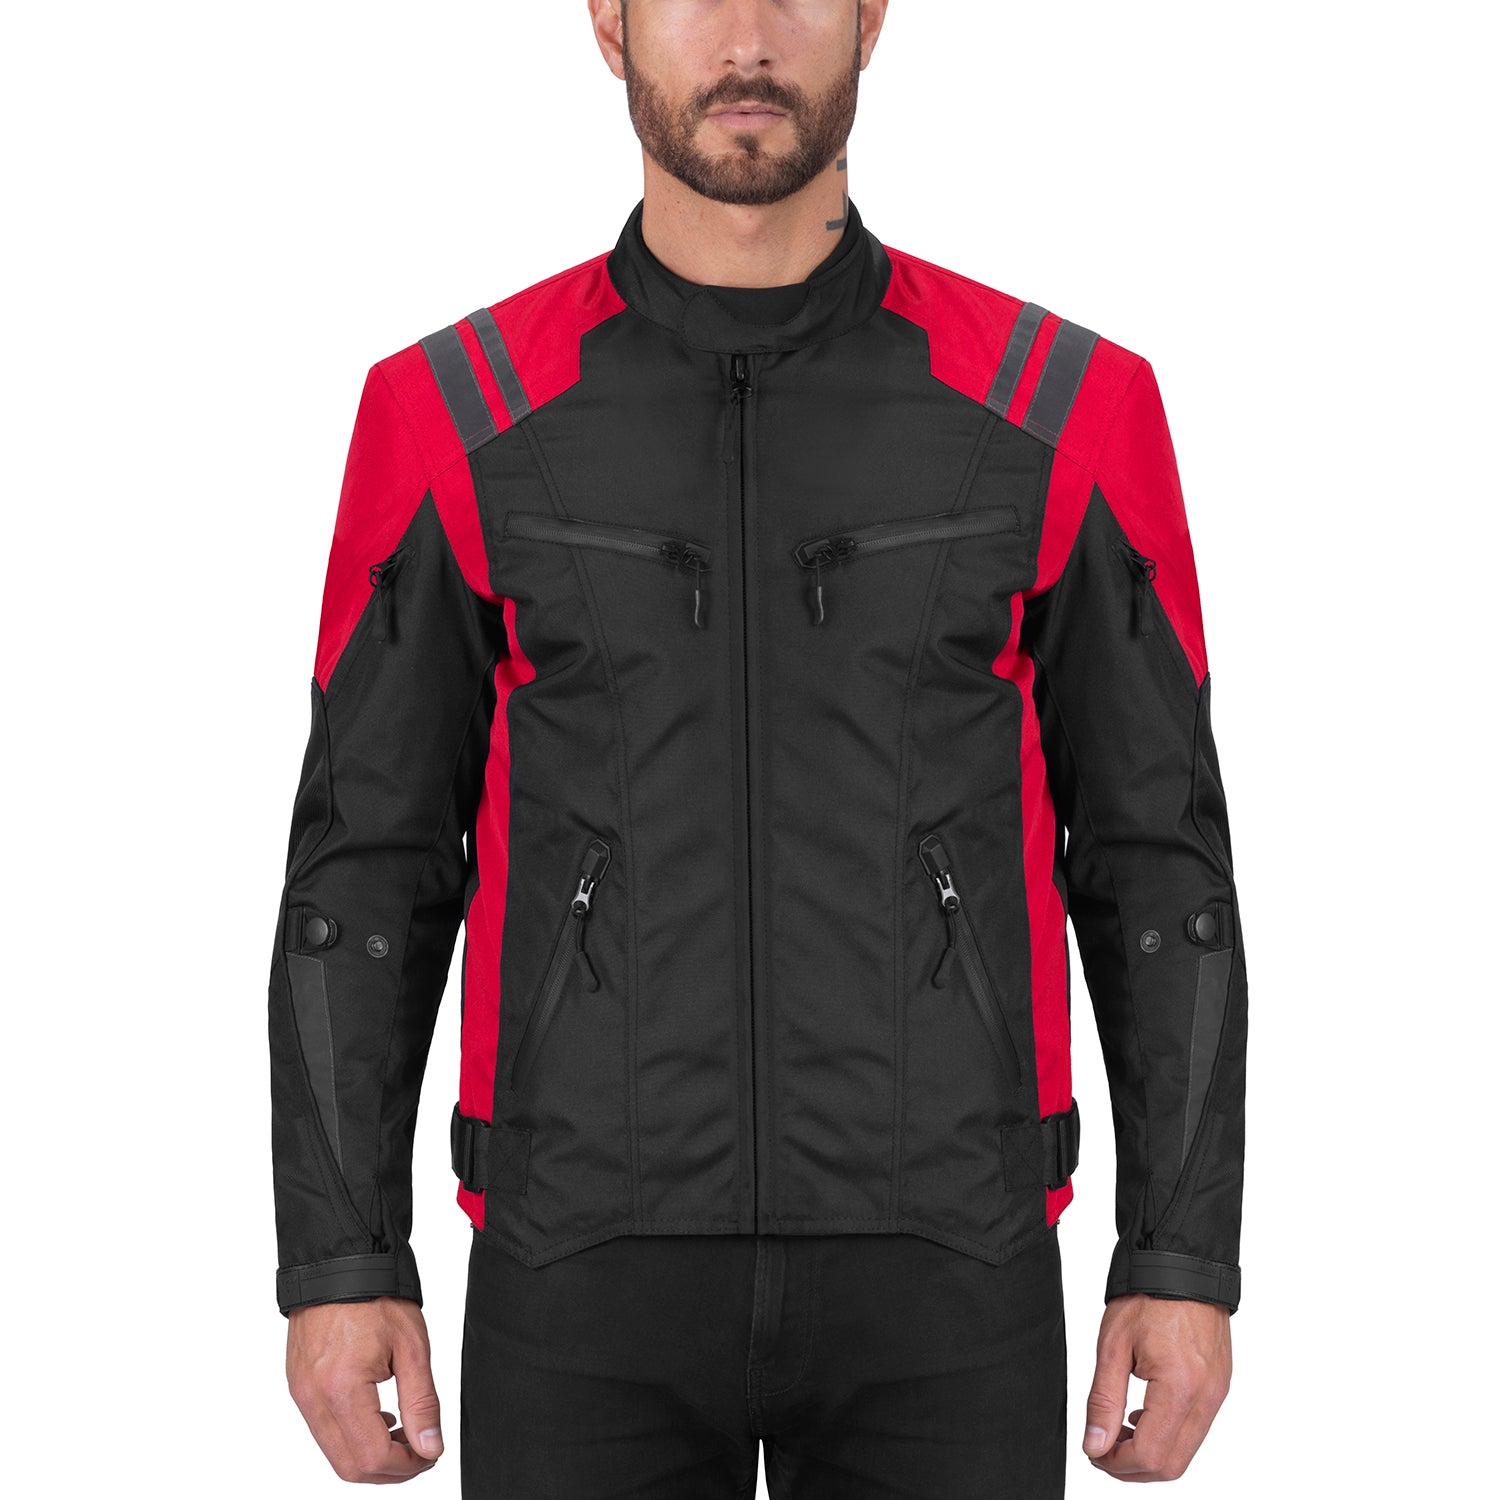 Find Cycle â€“ – Ironborn Red Quality Jacket Biker Textile Viking Vikingcycle